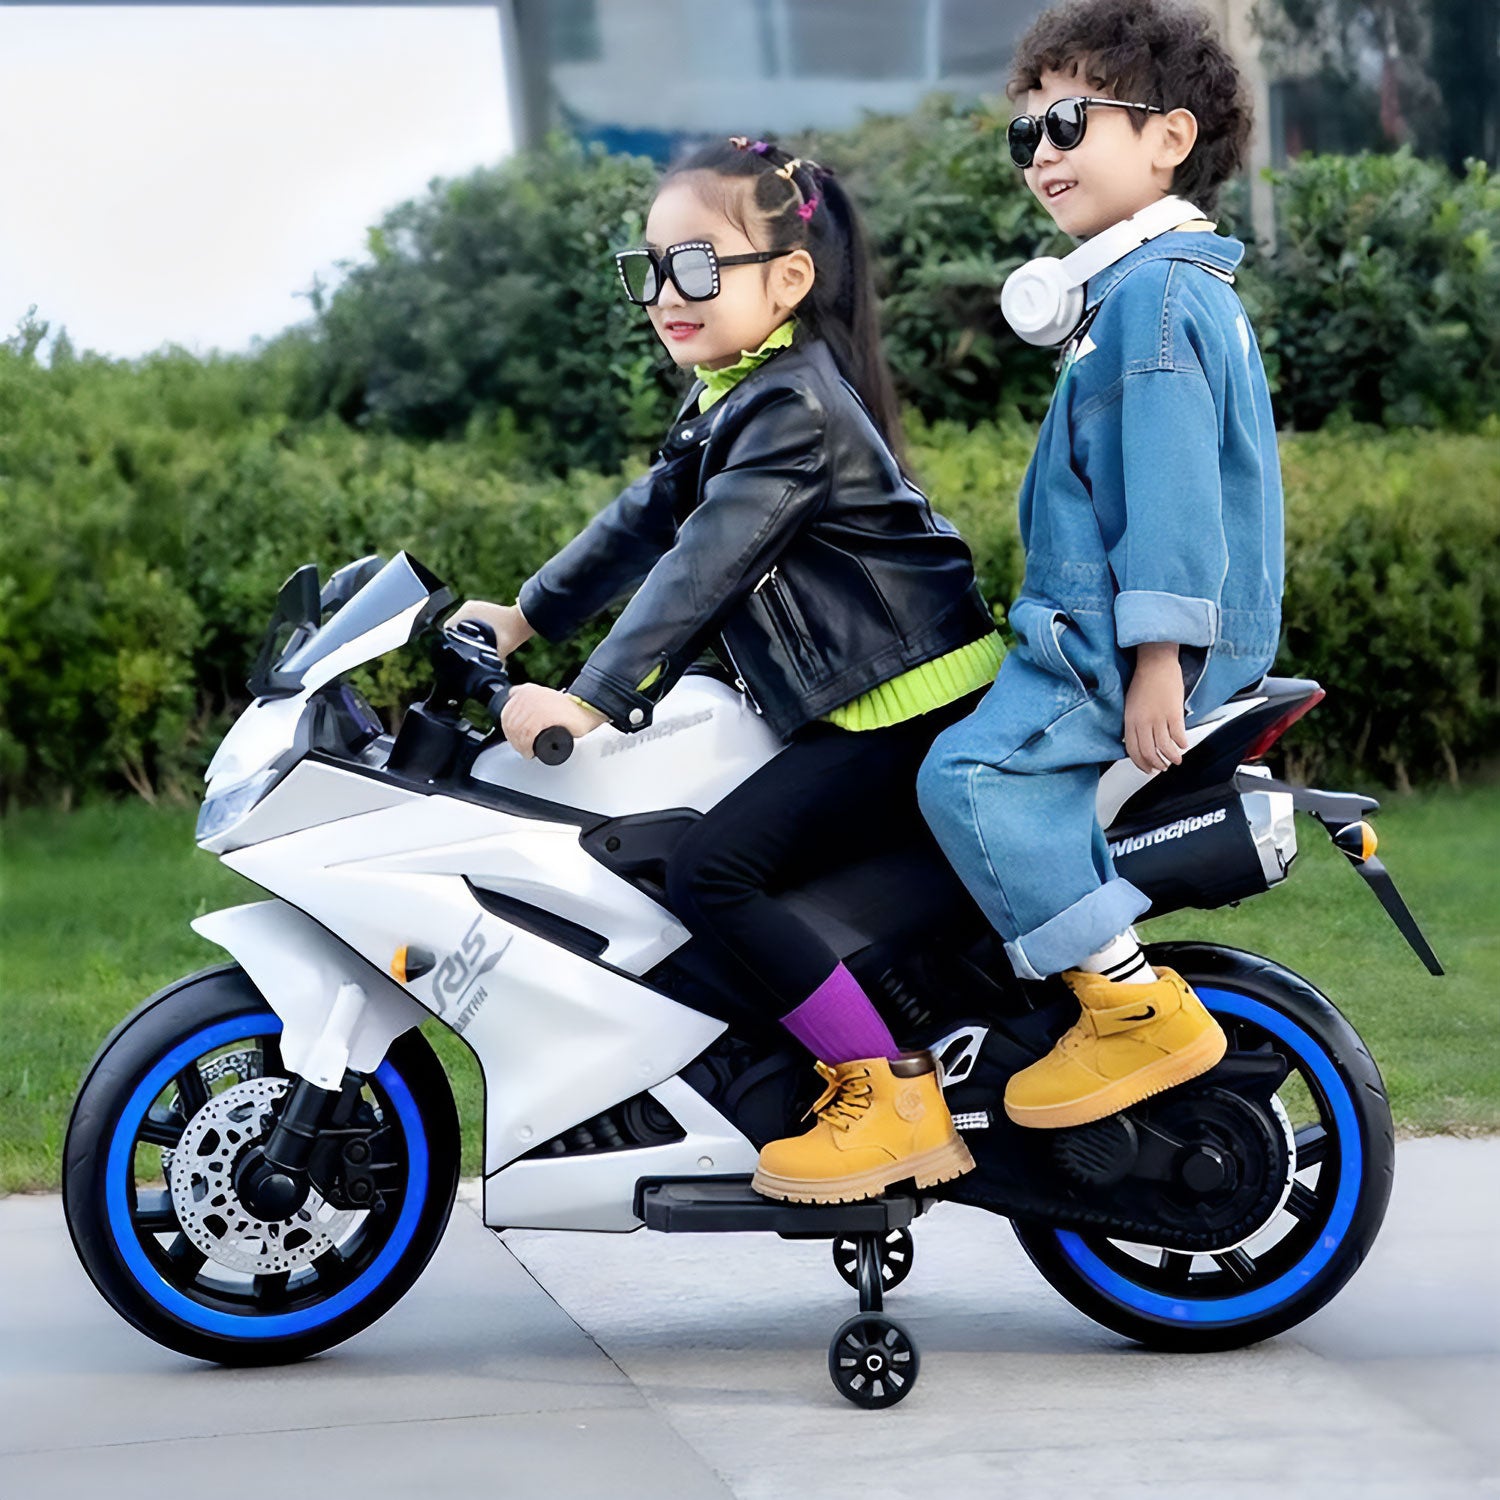 Baby Moo R15 Rechargeable 12V Battery Operated Ride On Bike for Kids with LED Lights, Music, and USB Port - White